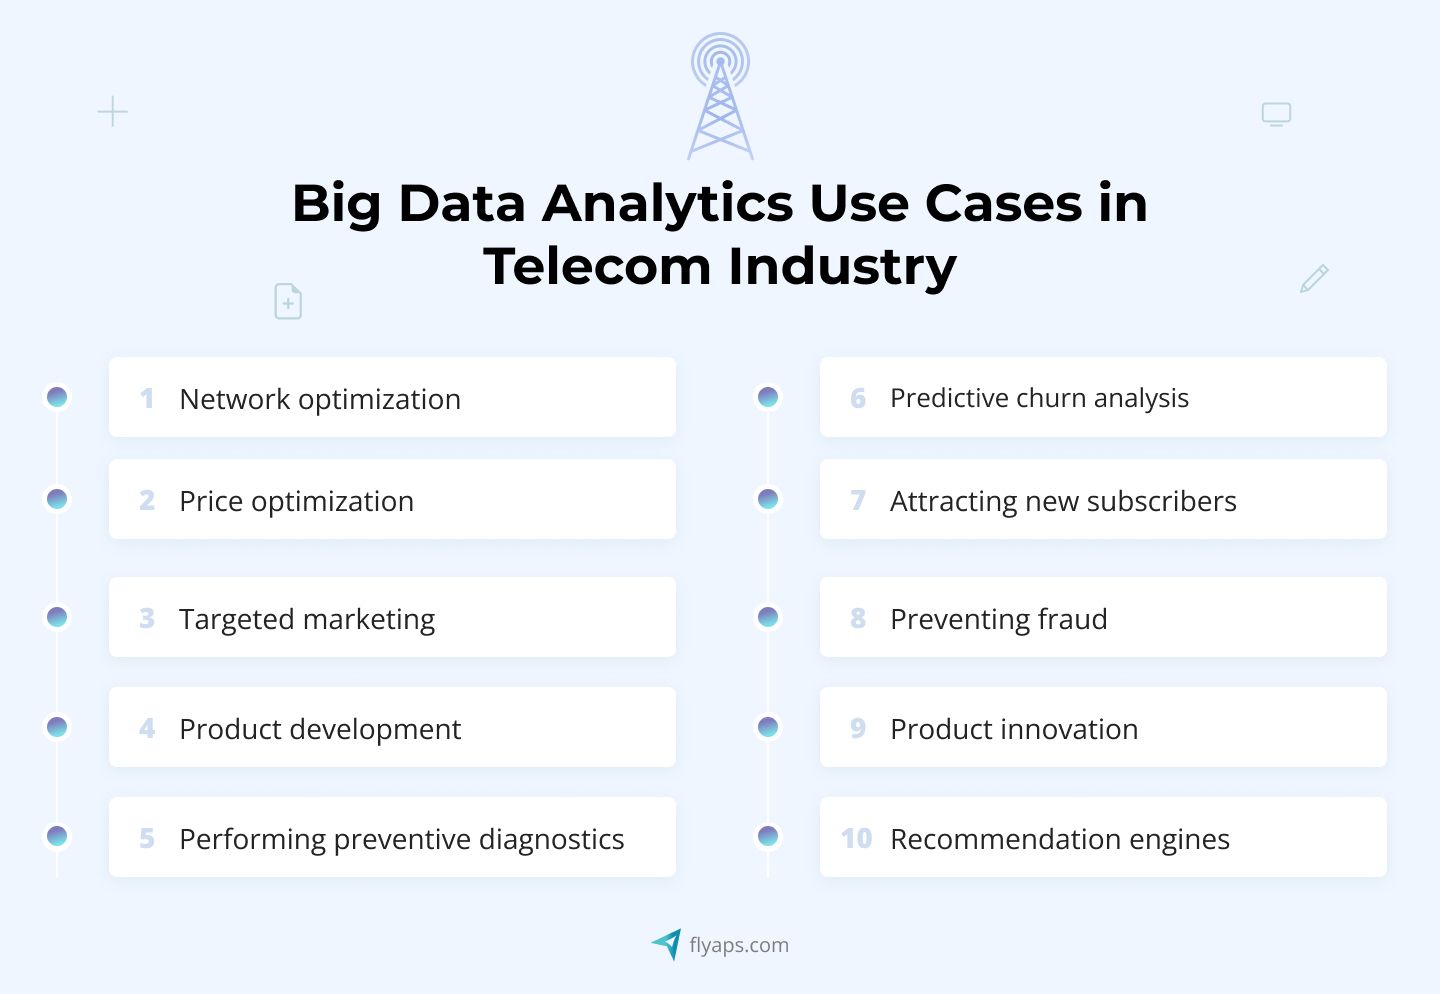 Big data analytics use cases in the telecom industry